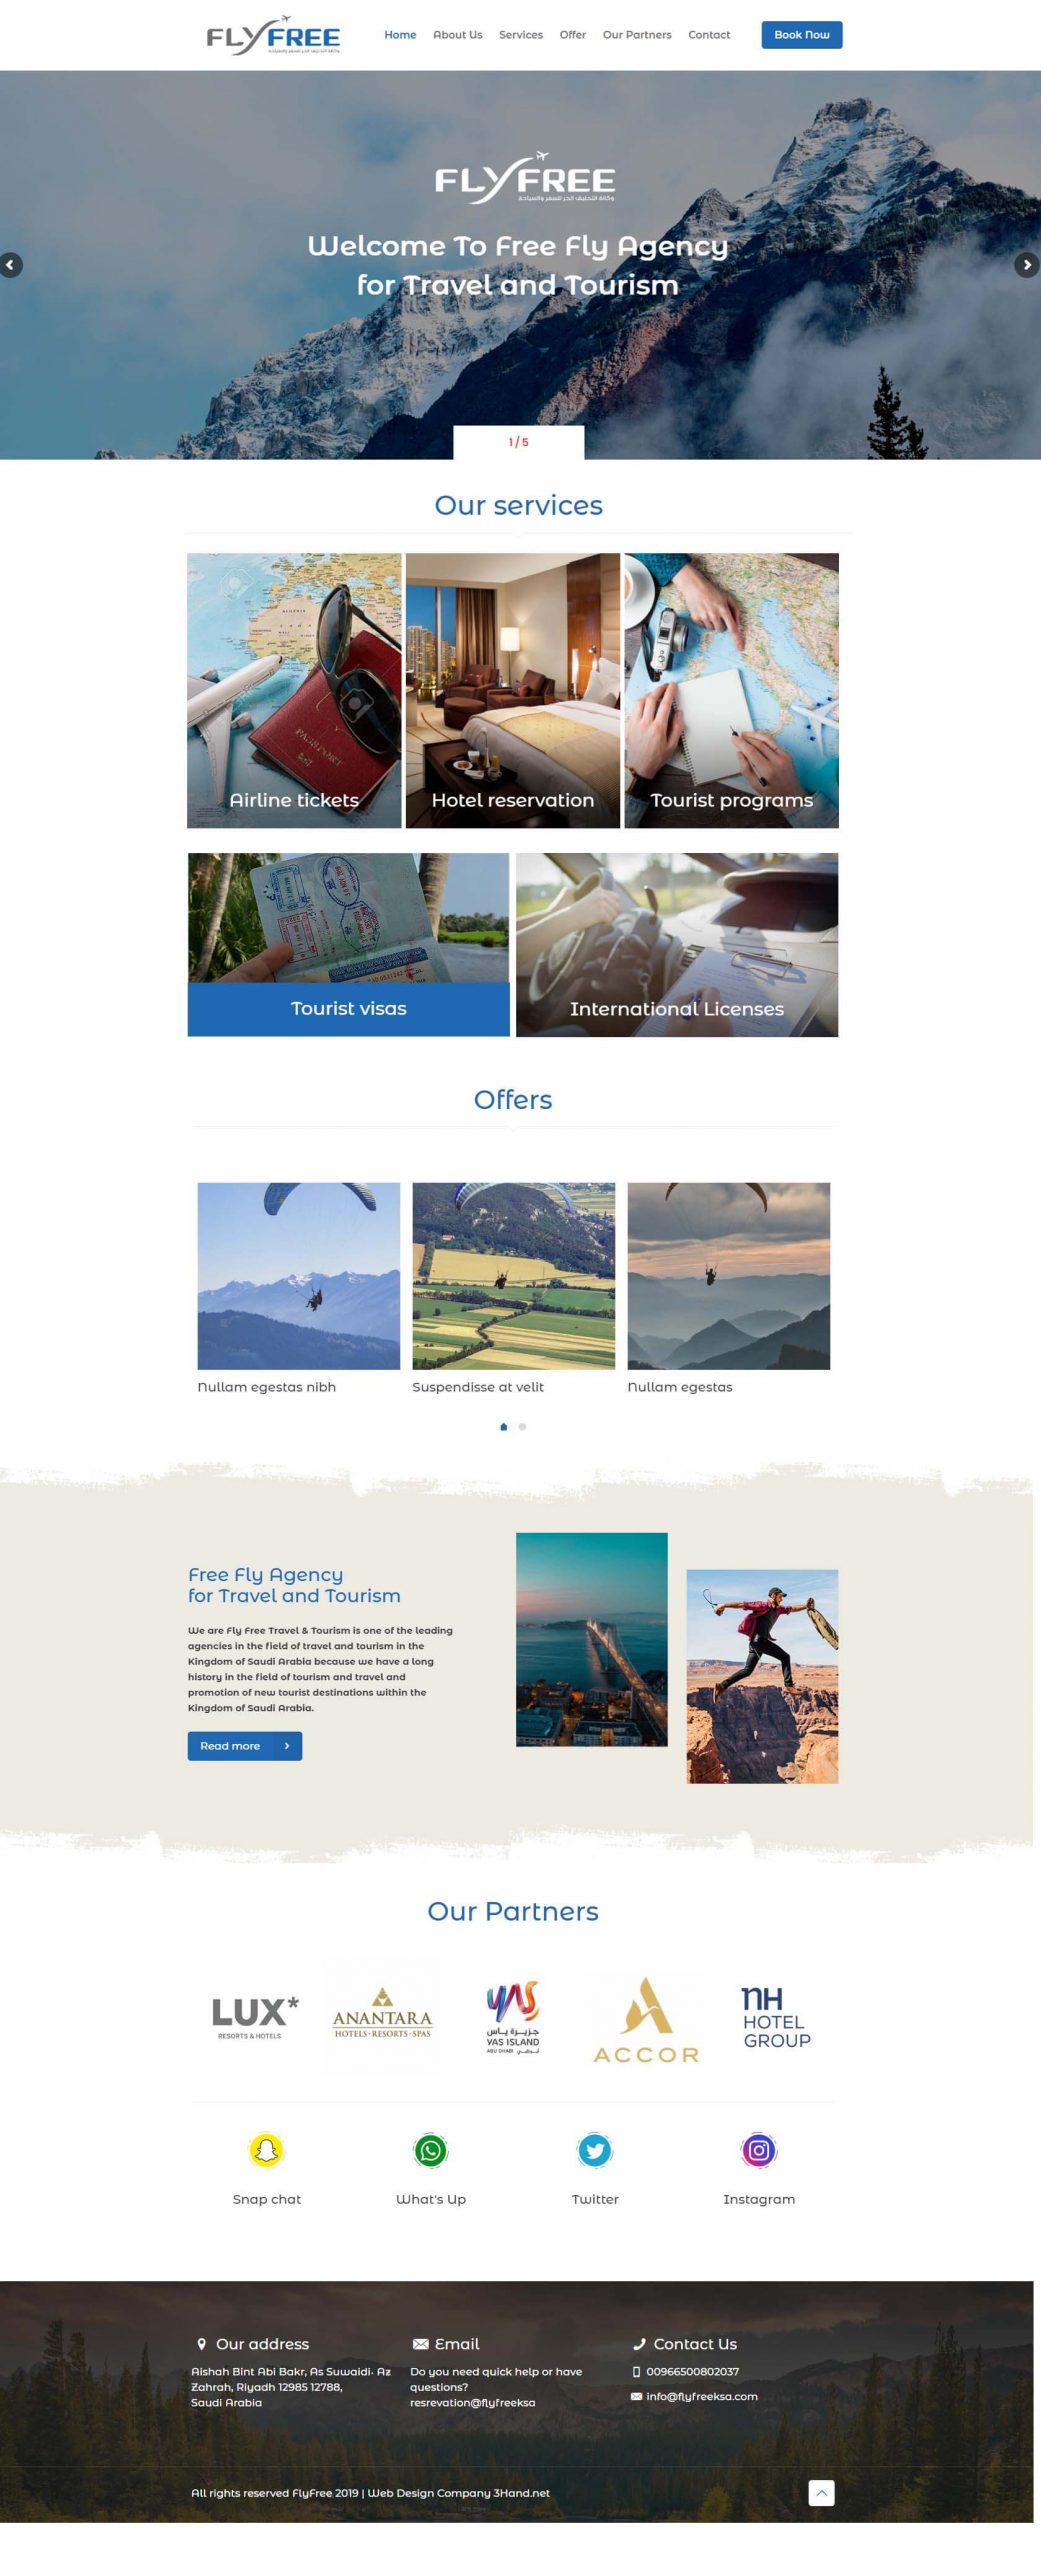 Free-Fly-Agency-–-For-Travel-and-Tourism-2-scaled